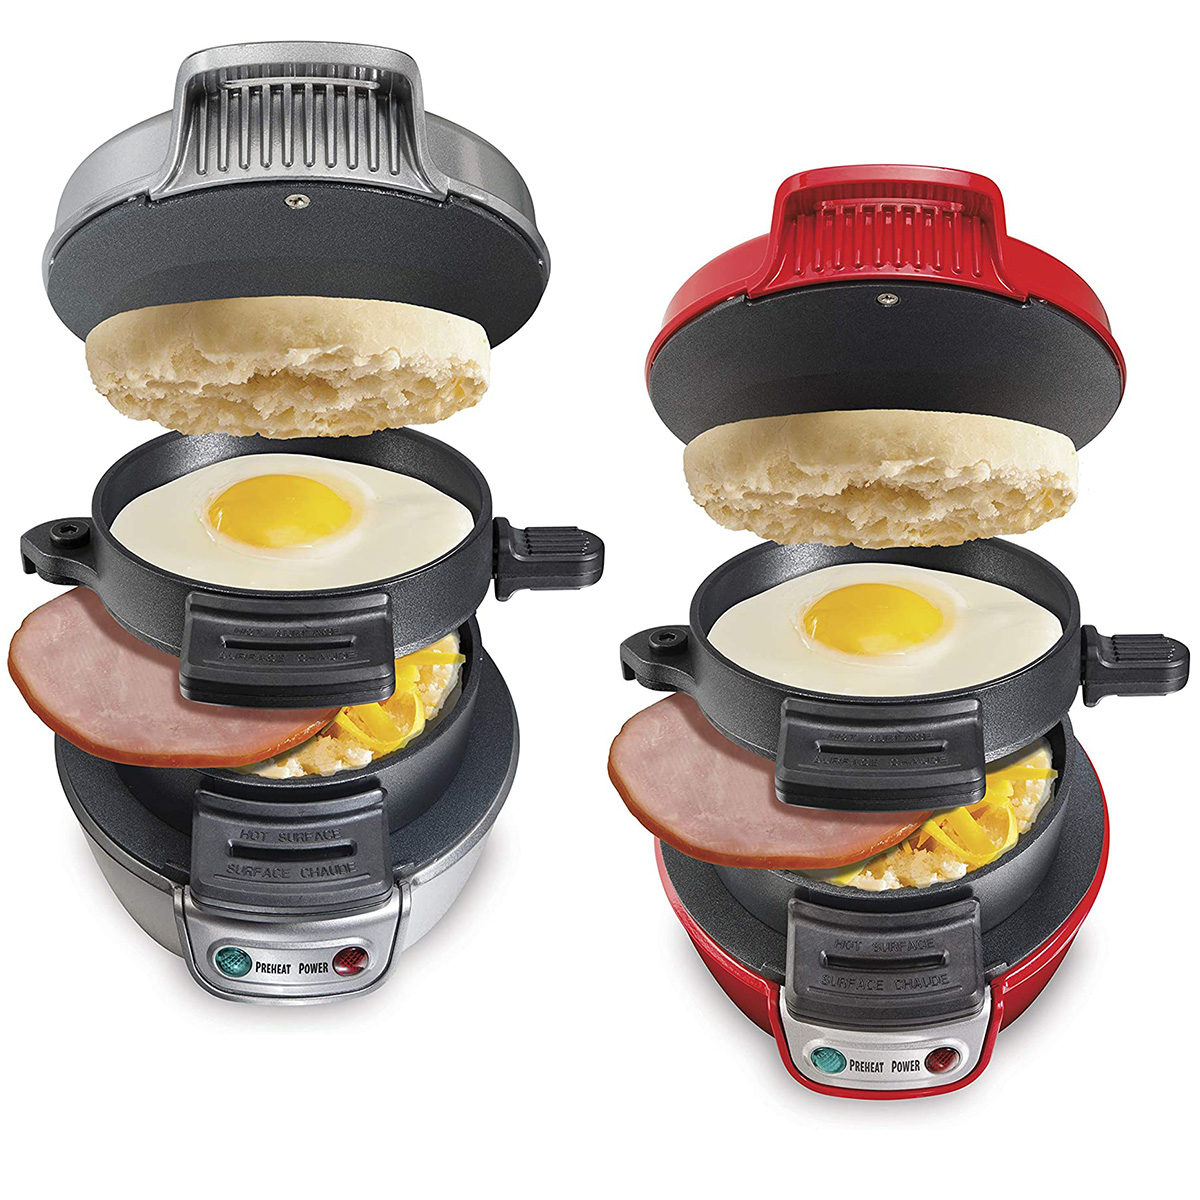 https://akns-images.eonline.com/eol_images/Entire_Site/20221026/rs_1200x1200-221126121142-1200.ecomm-Breakfast-Sandwich-Maker.ct.jpg?fit=around%7C1080:1080&output-quality=90&crop=1080:1080;center,top